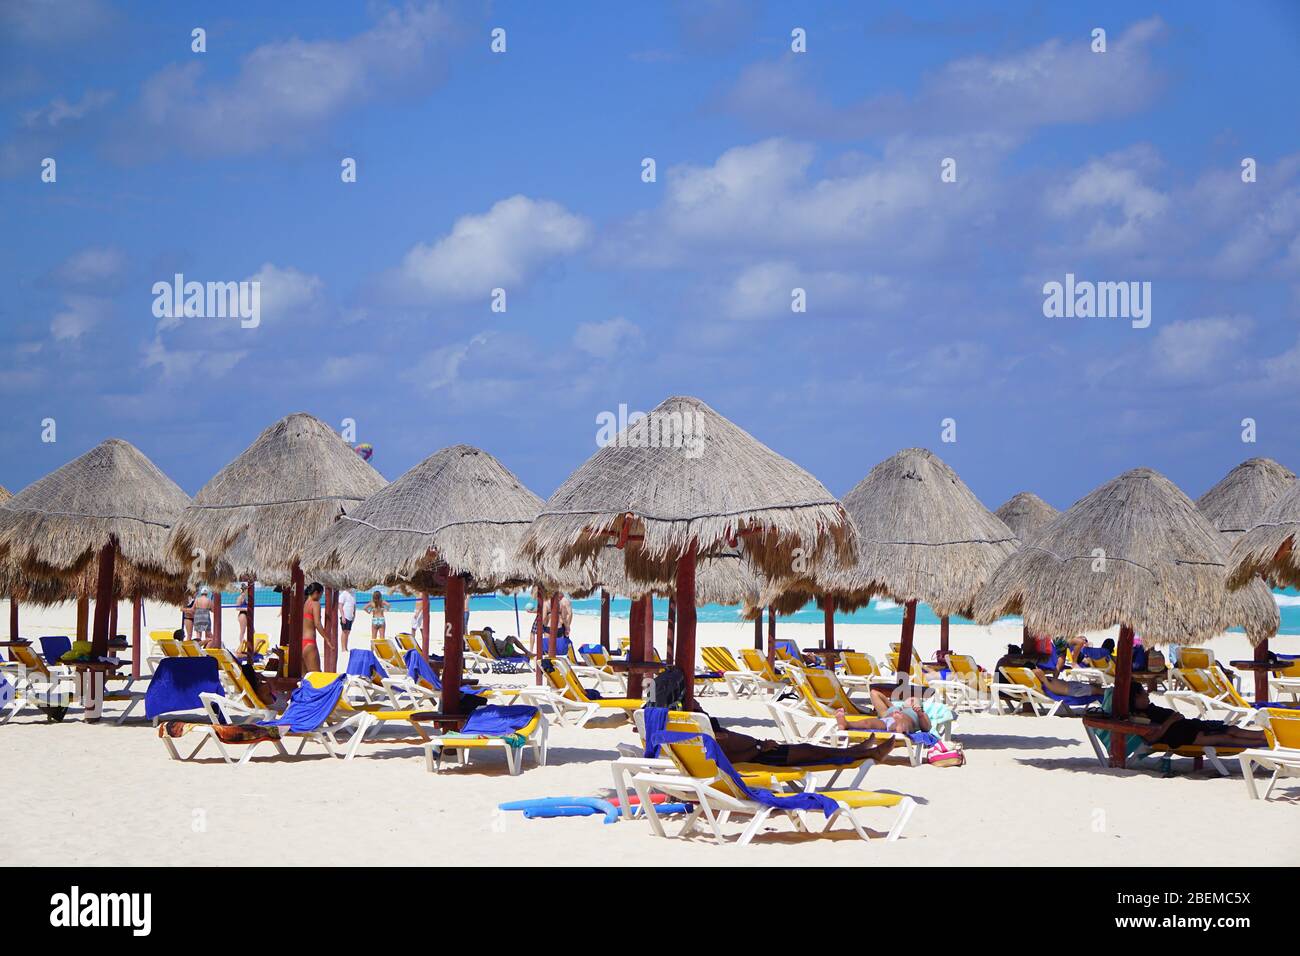 Quiet beach, blue sky, turquoise water, Cancun Mexico Stock Photo